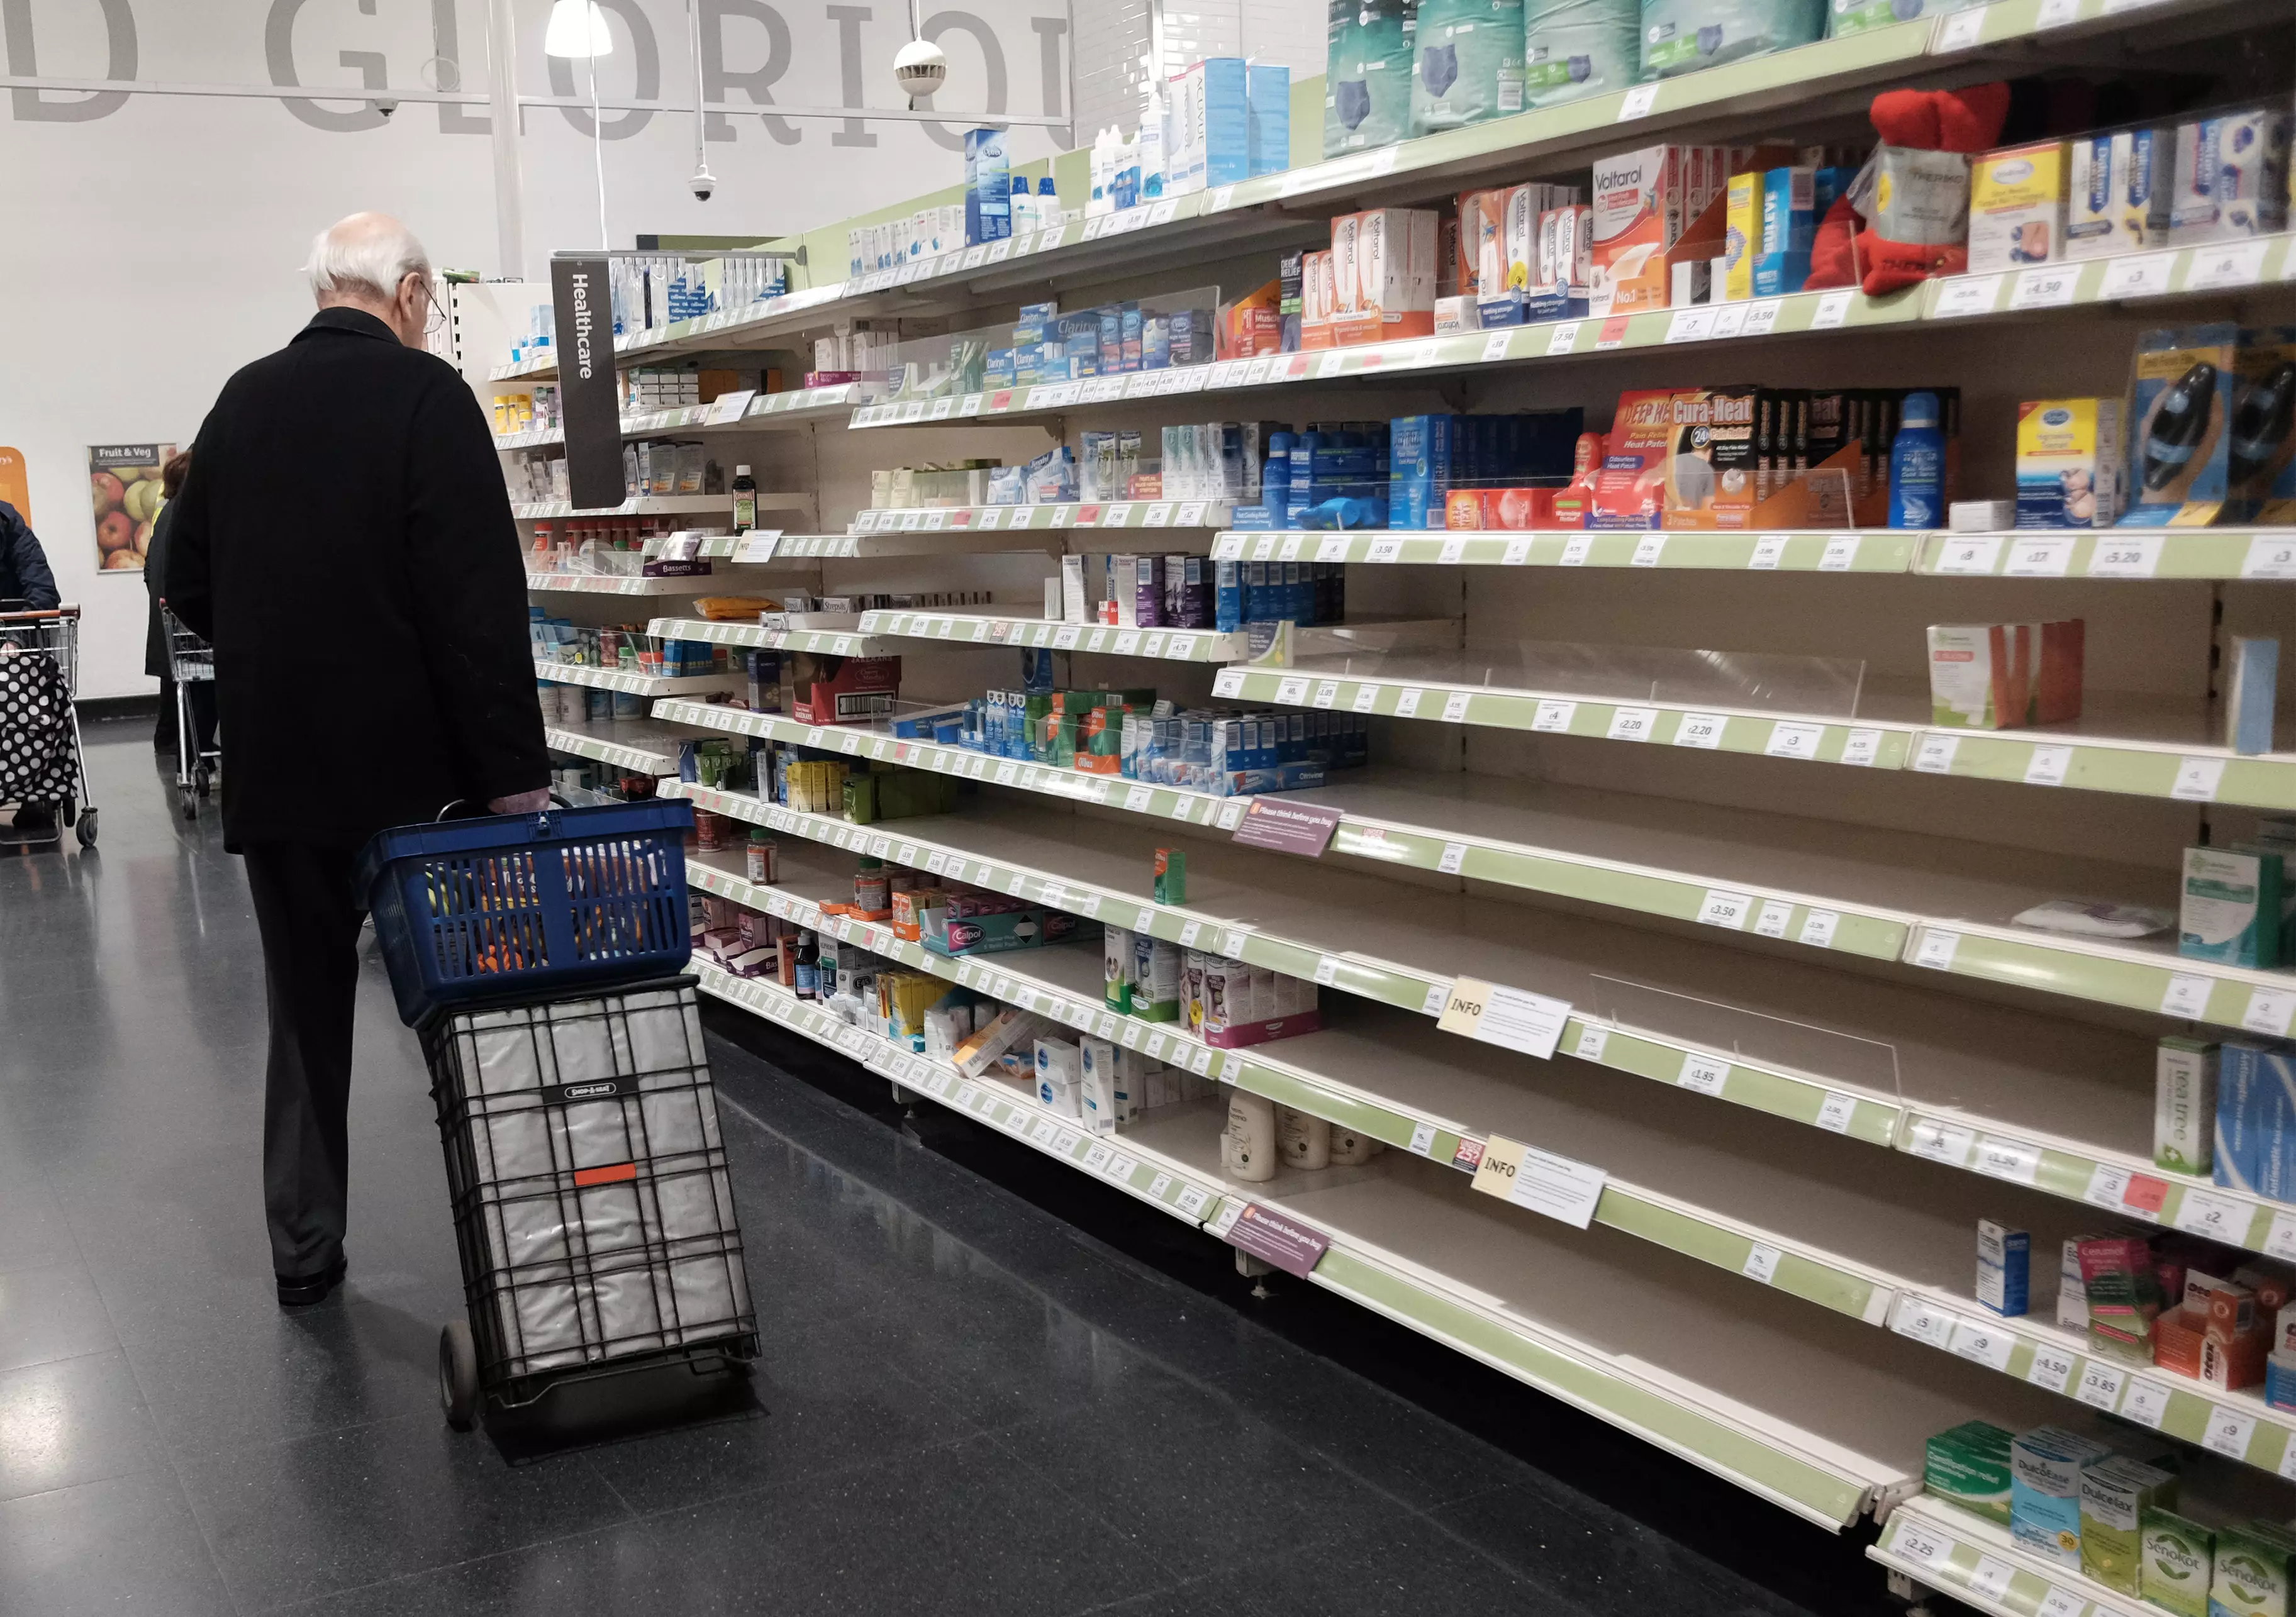 Supermarket workers have been working tirelessly to fill shelves (